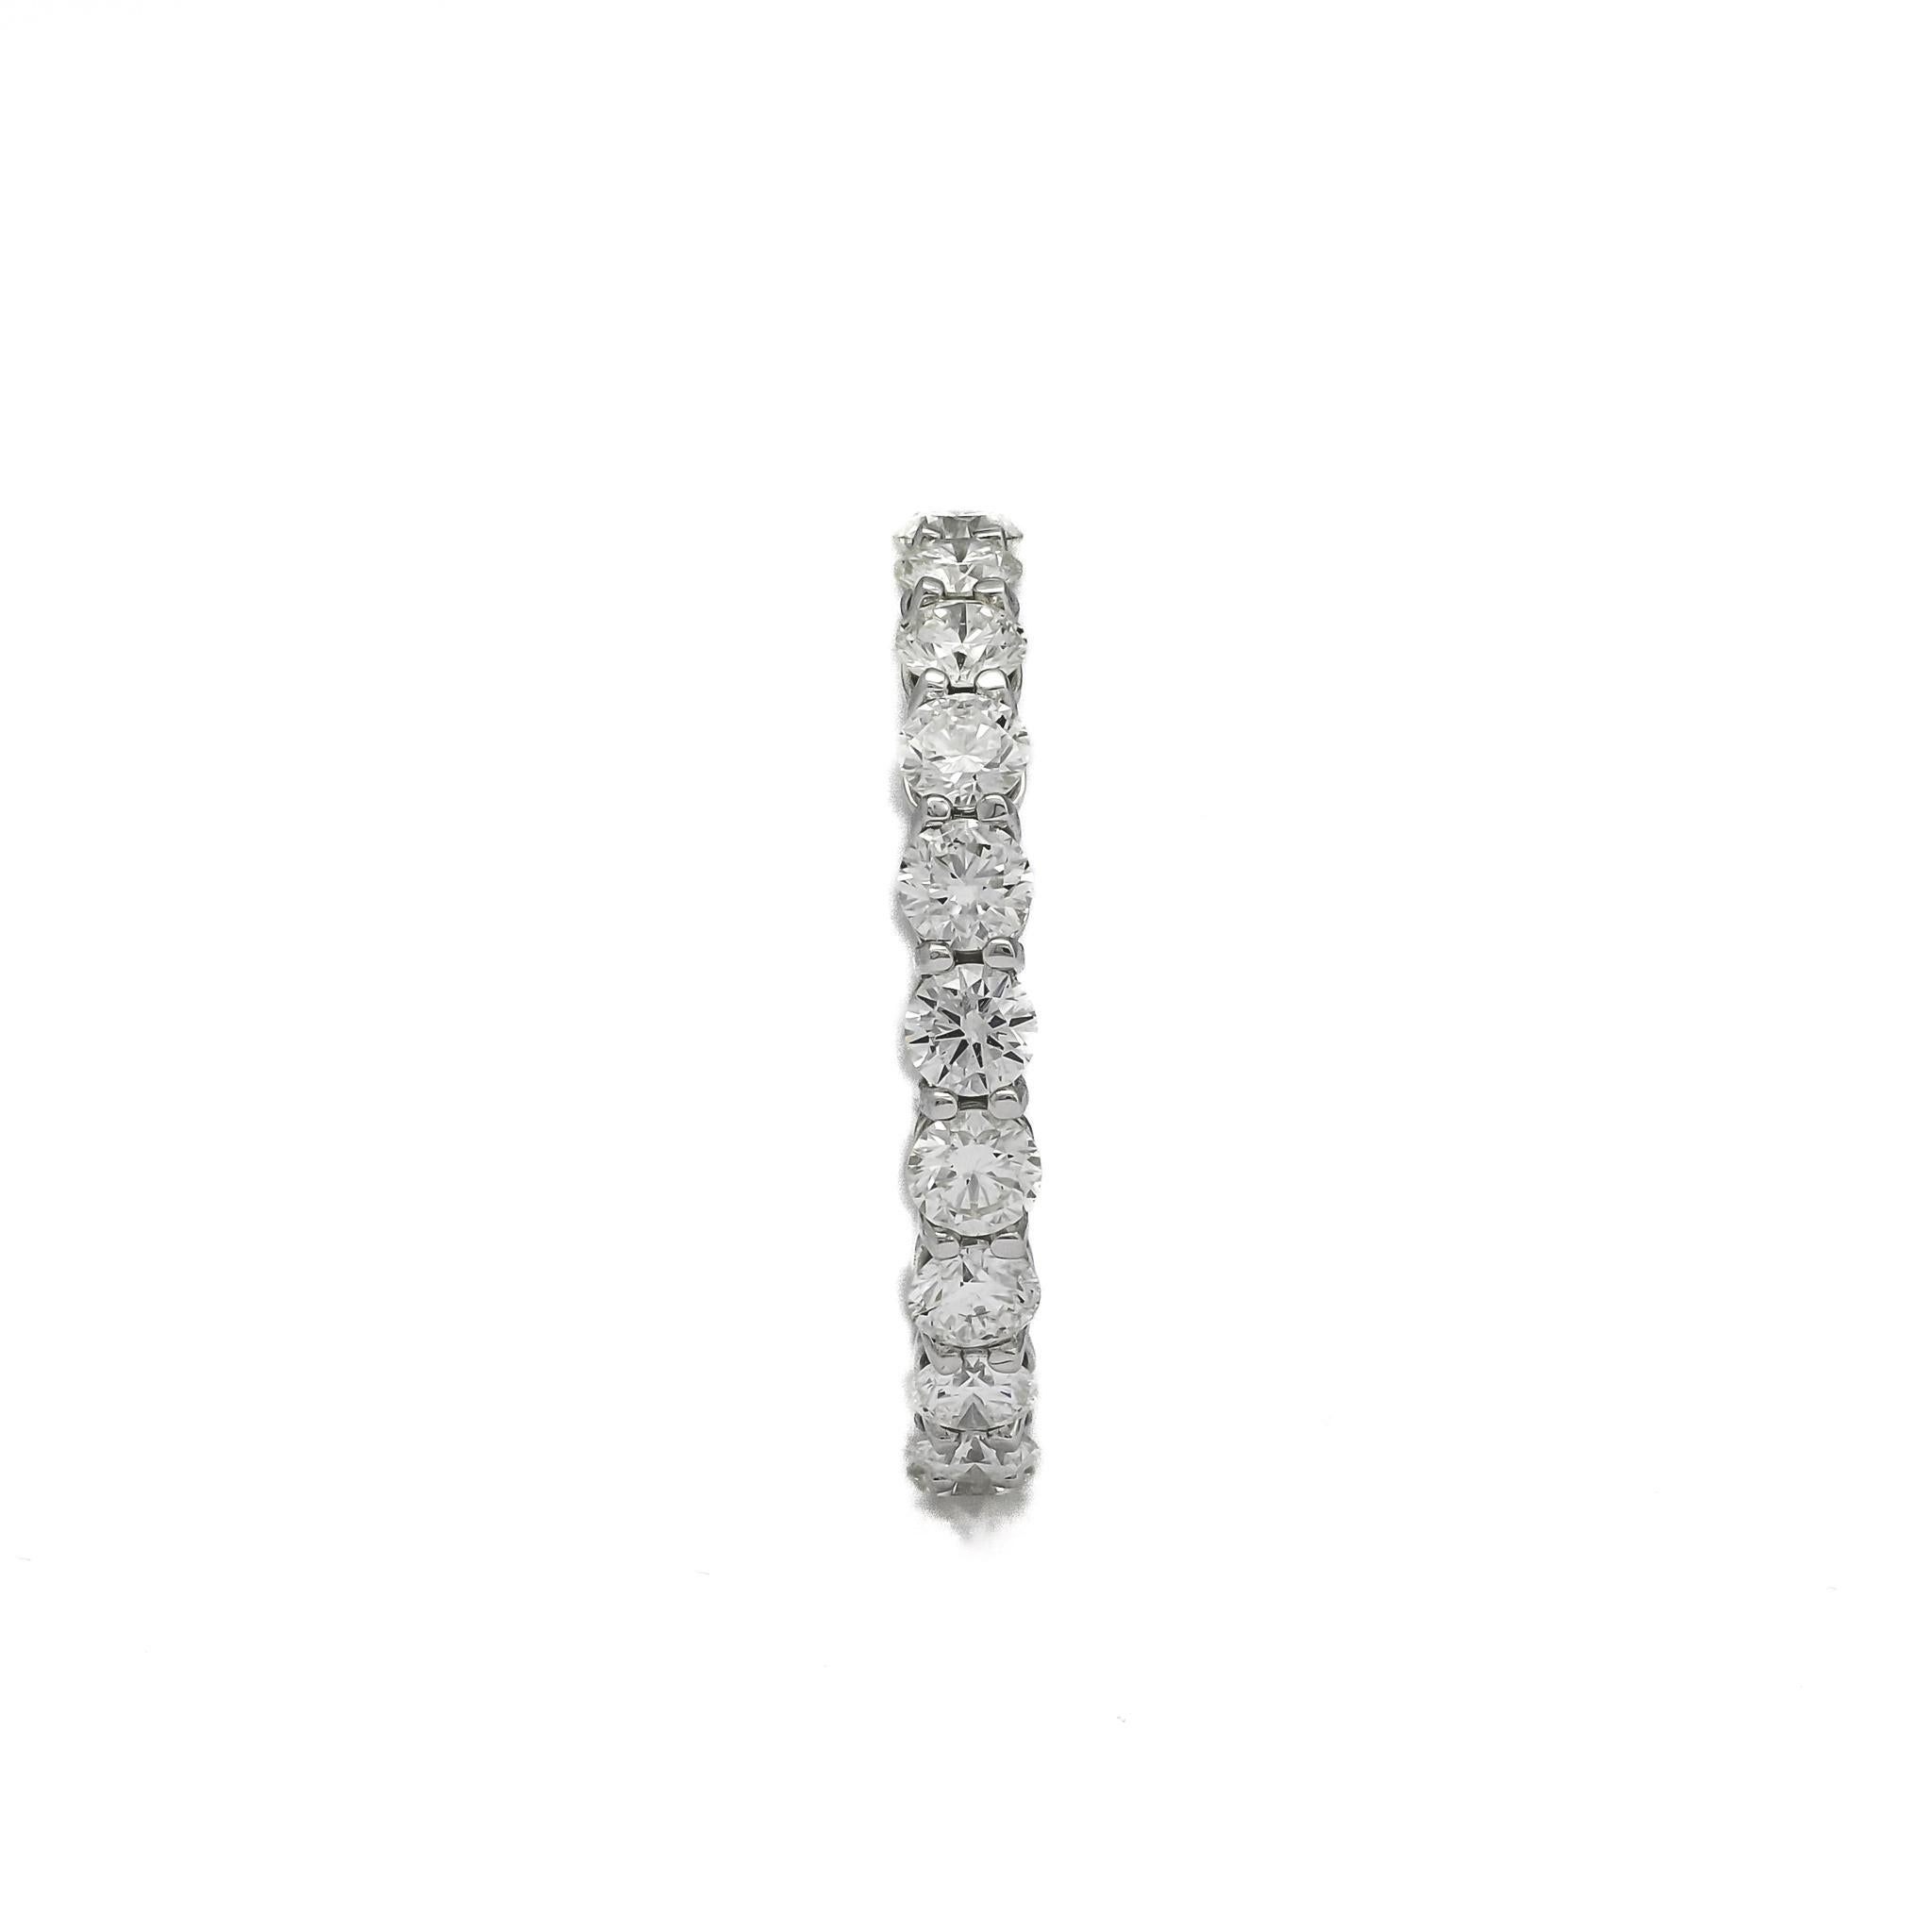 For Sale:  3.15 Carat Full Eternity Natural Diamond Ring in White Gold with 4 Prongs 4